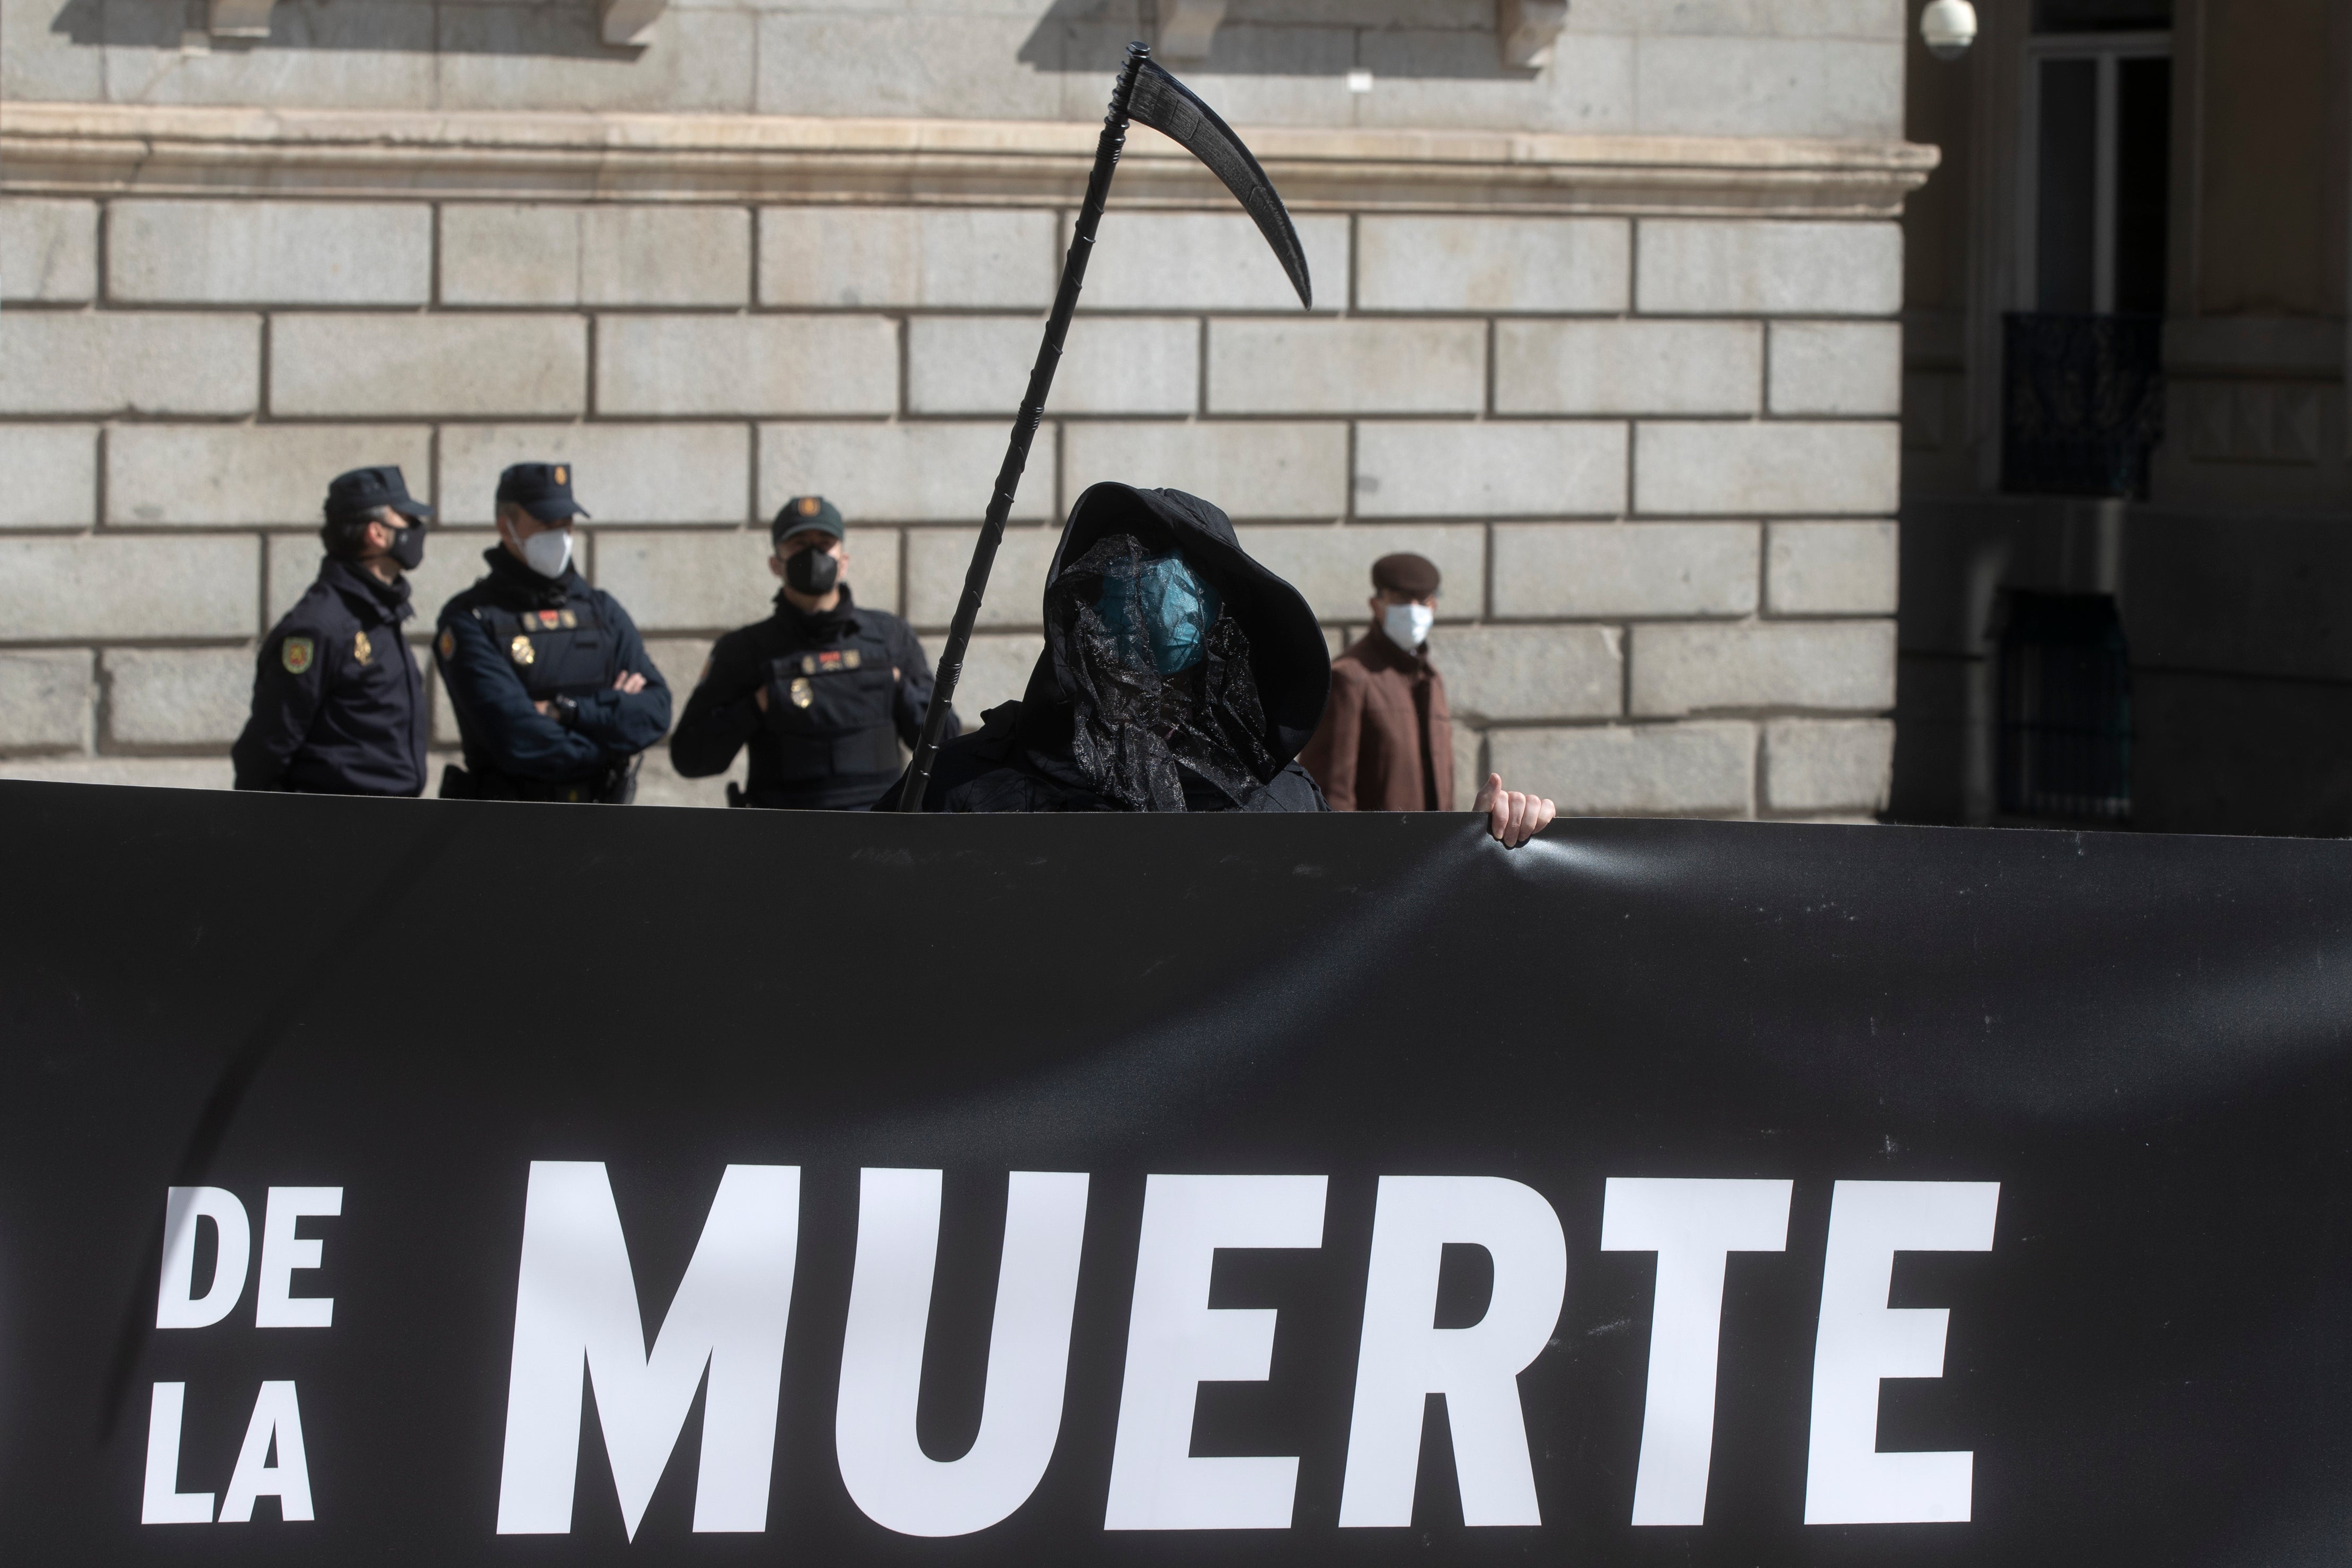 An anti Euthanasia protester stands in front of police officers outside the Spanish Parliament